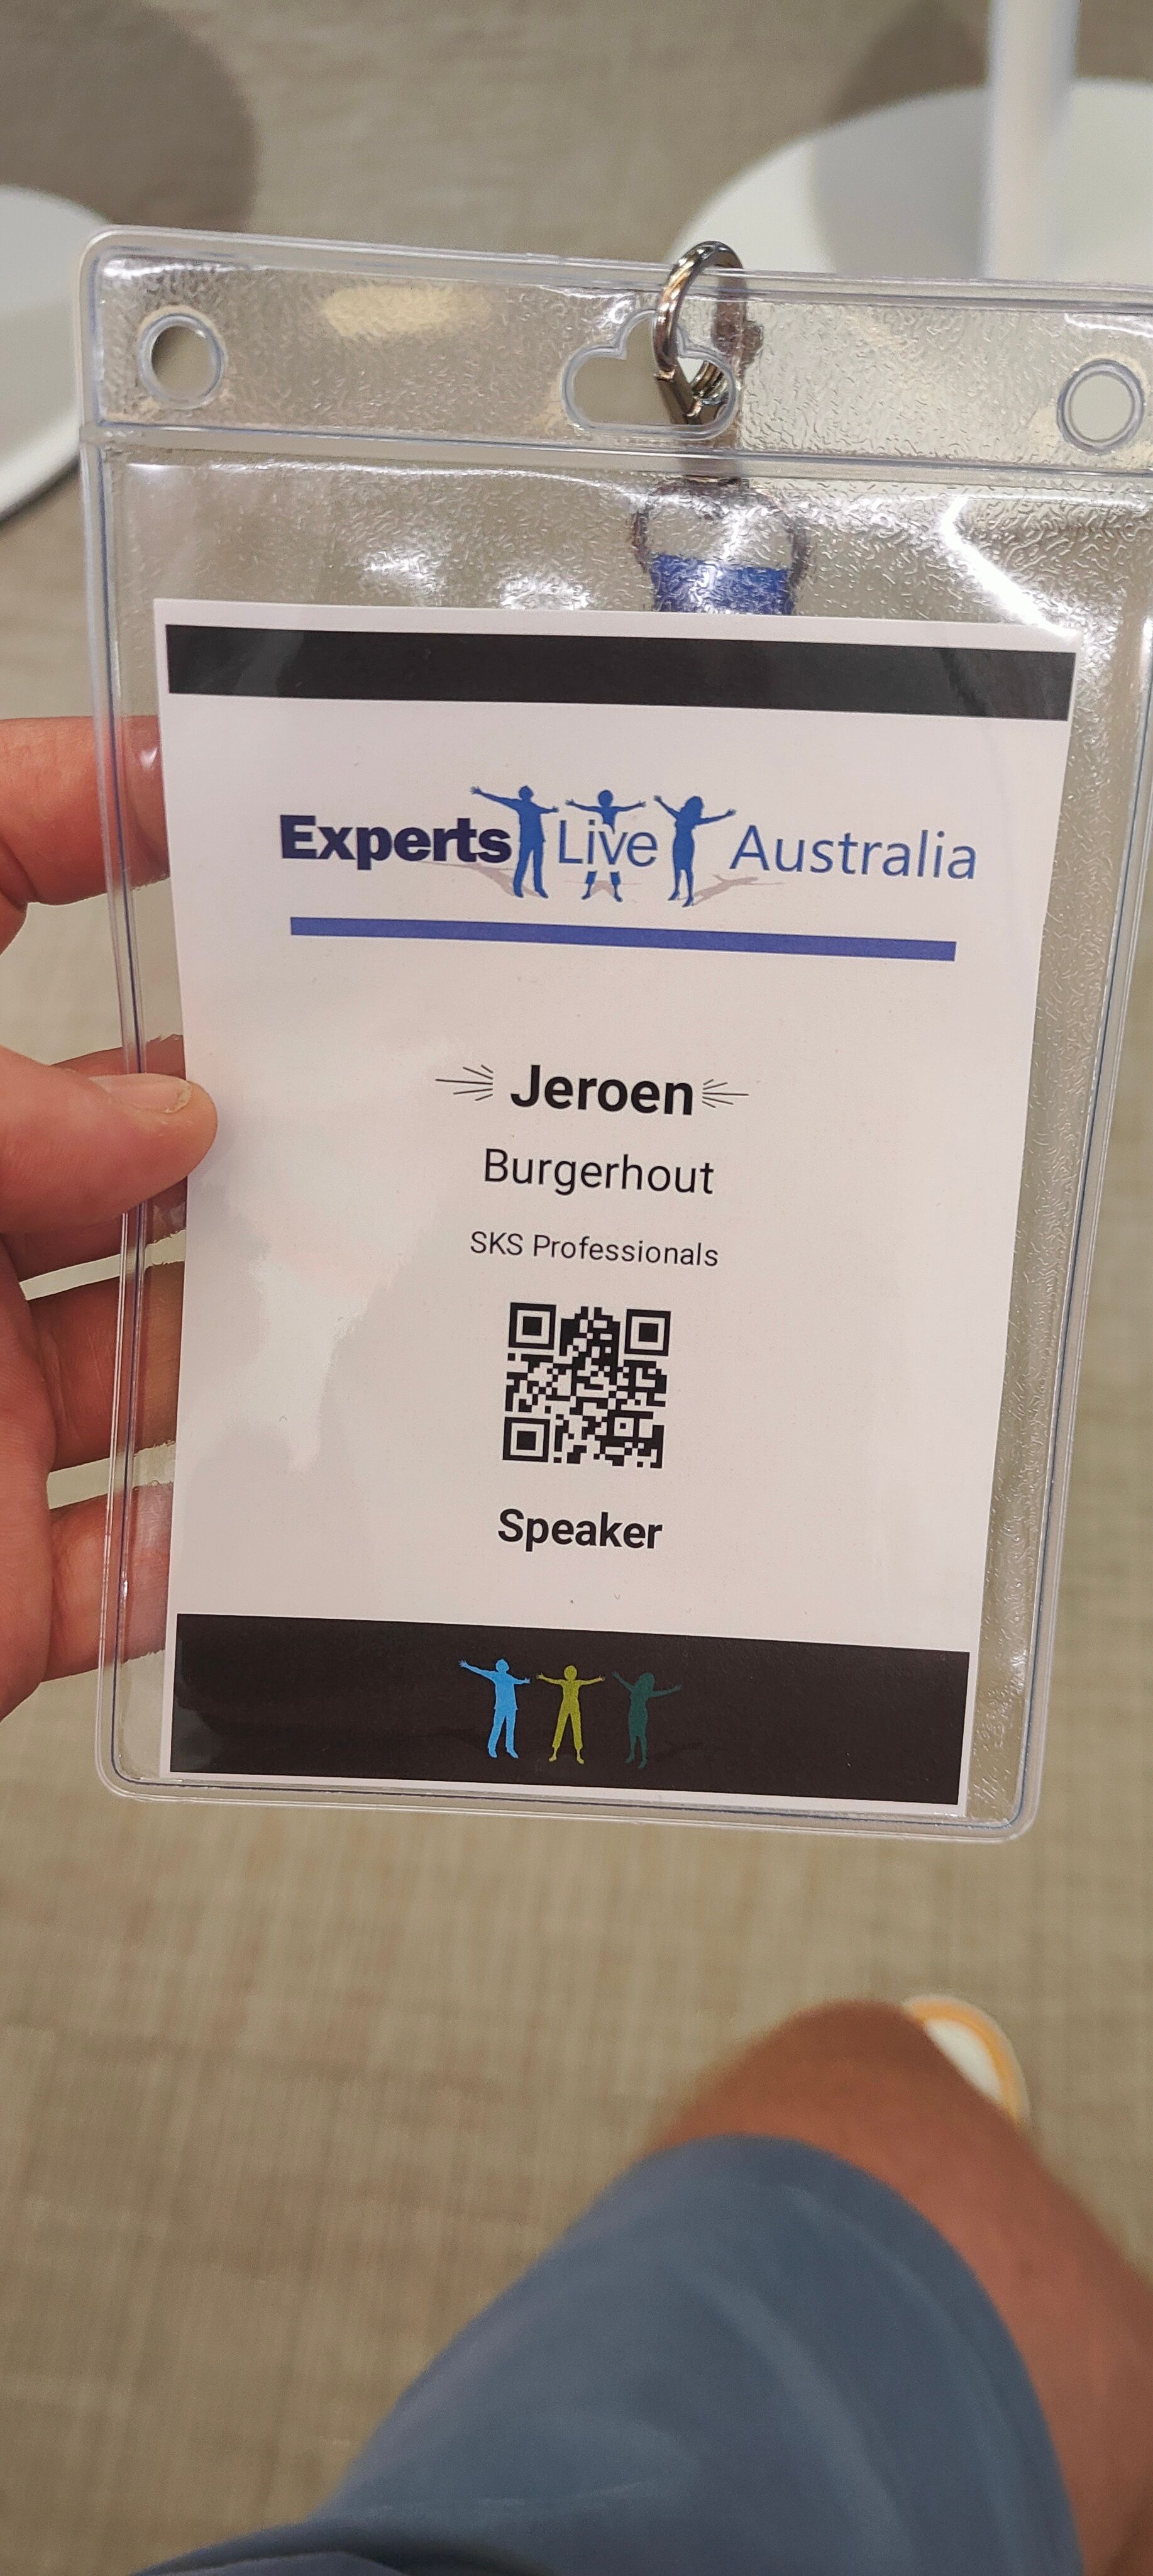 My experience at Experts Live Australia